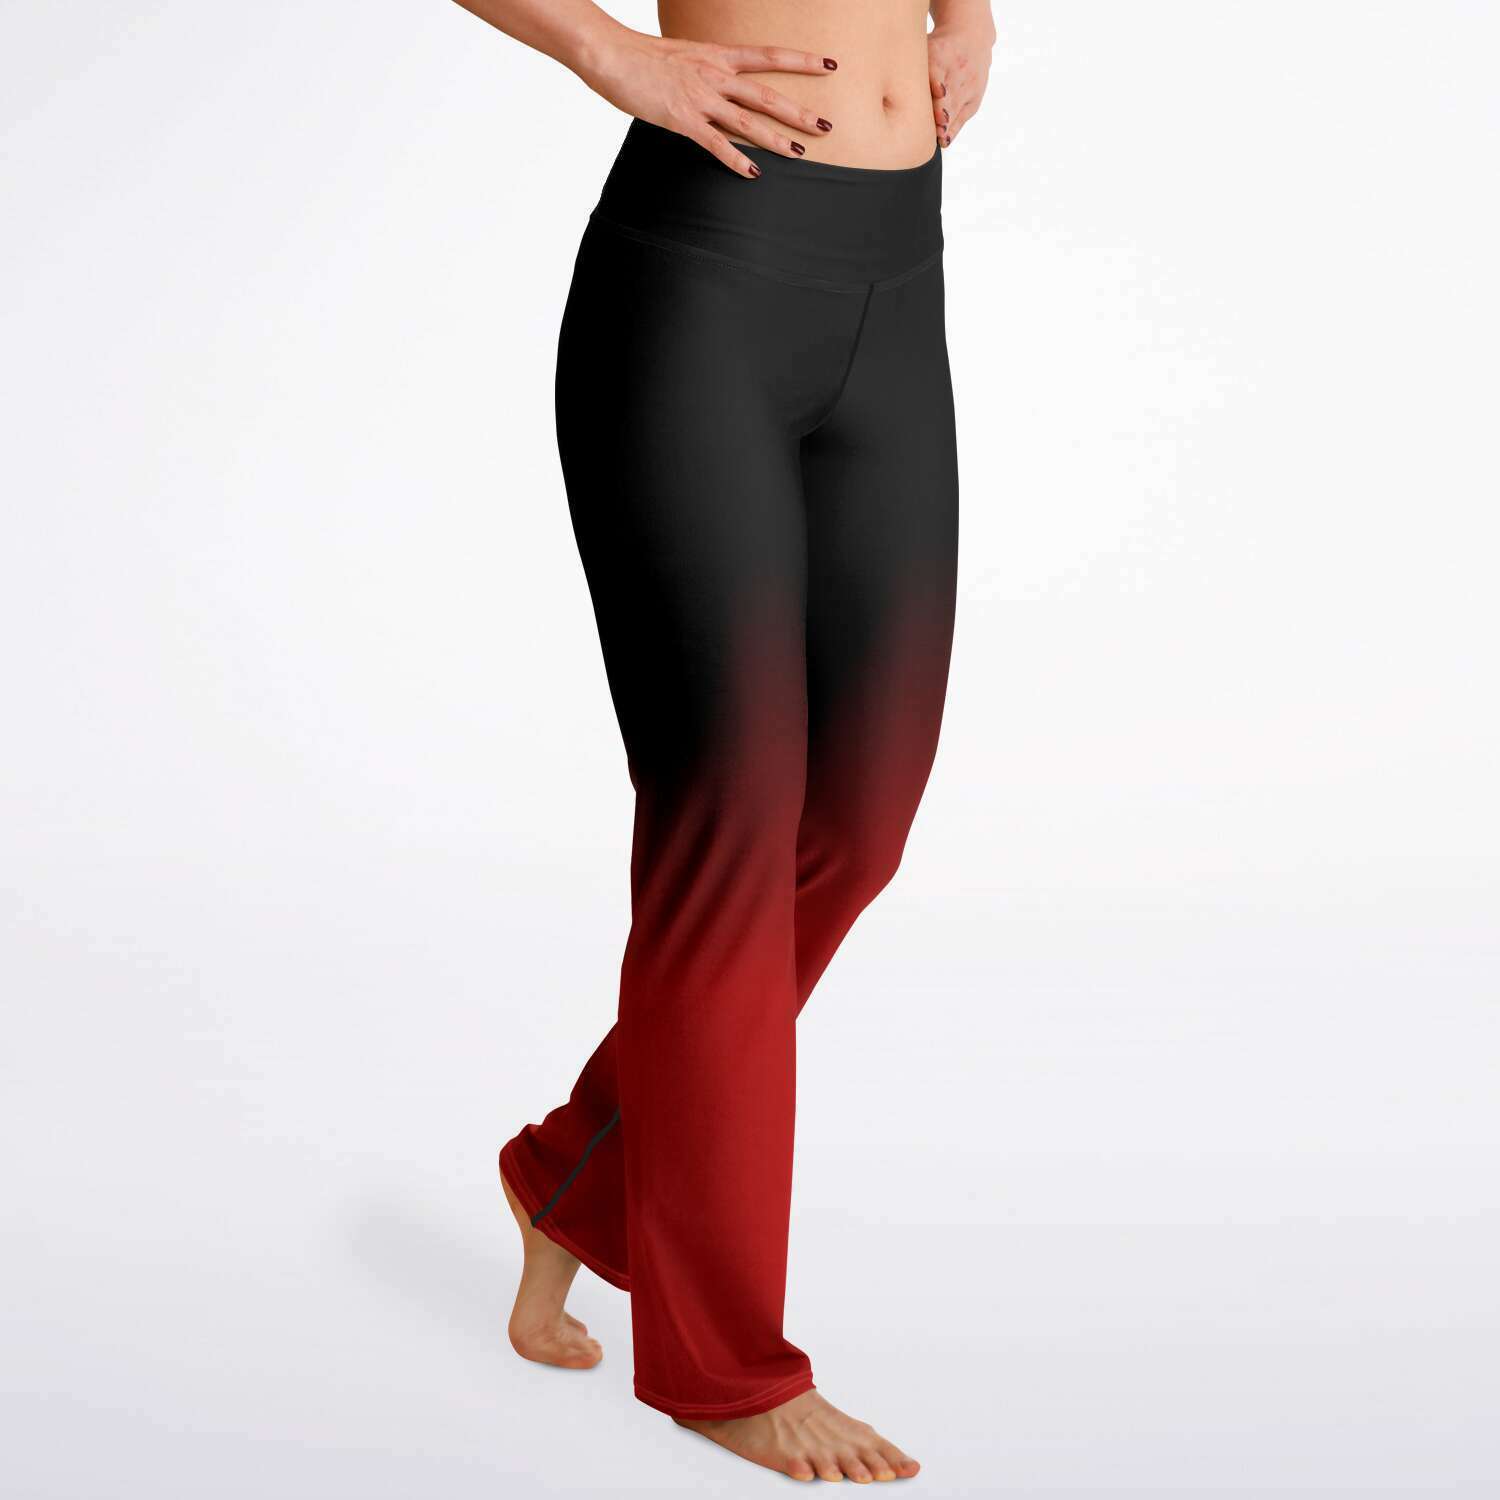 Black Red Ombre Flared Leggings, Tie Dye Printed High Waisted Yoga